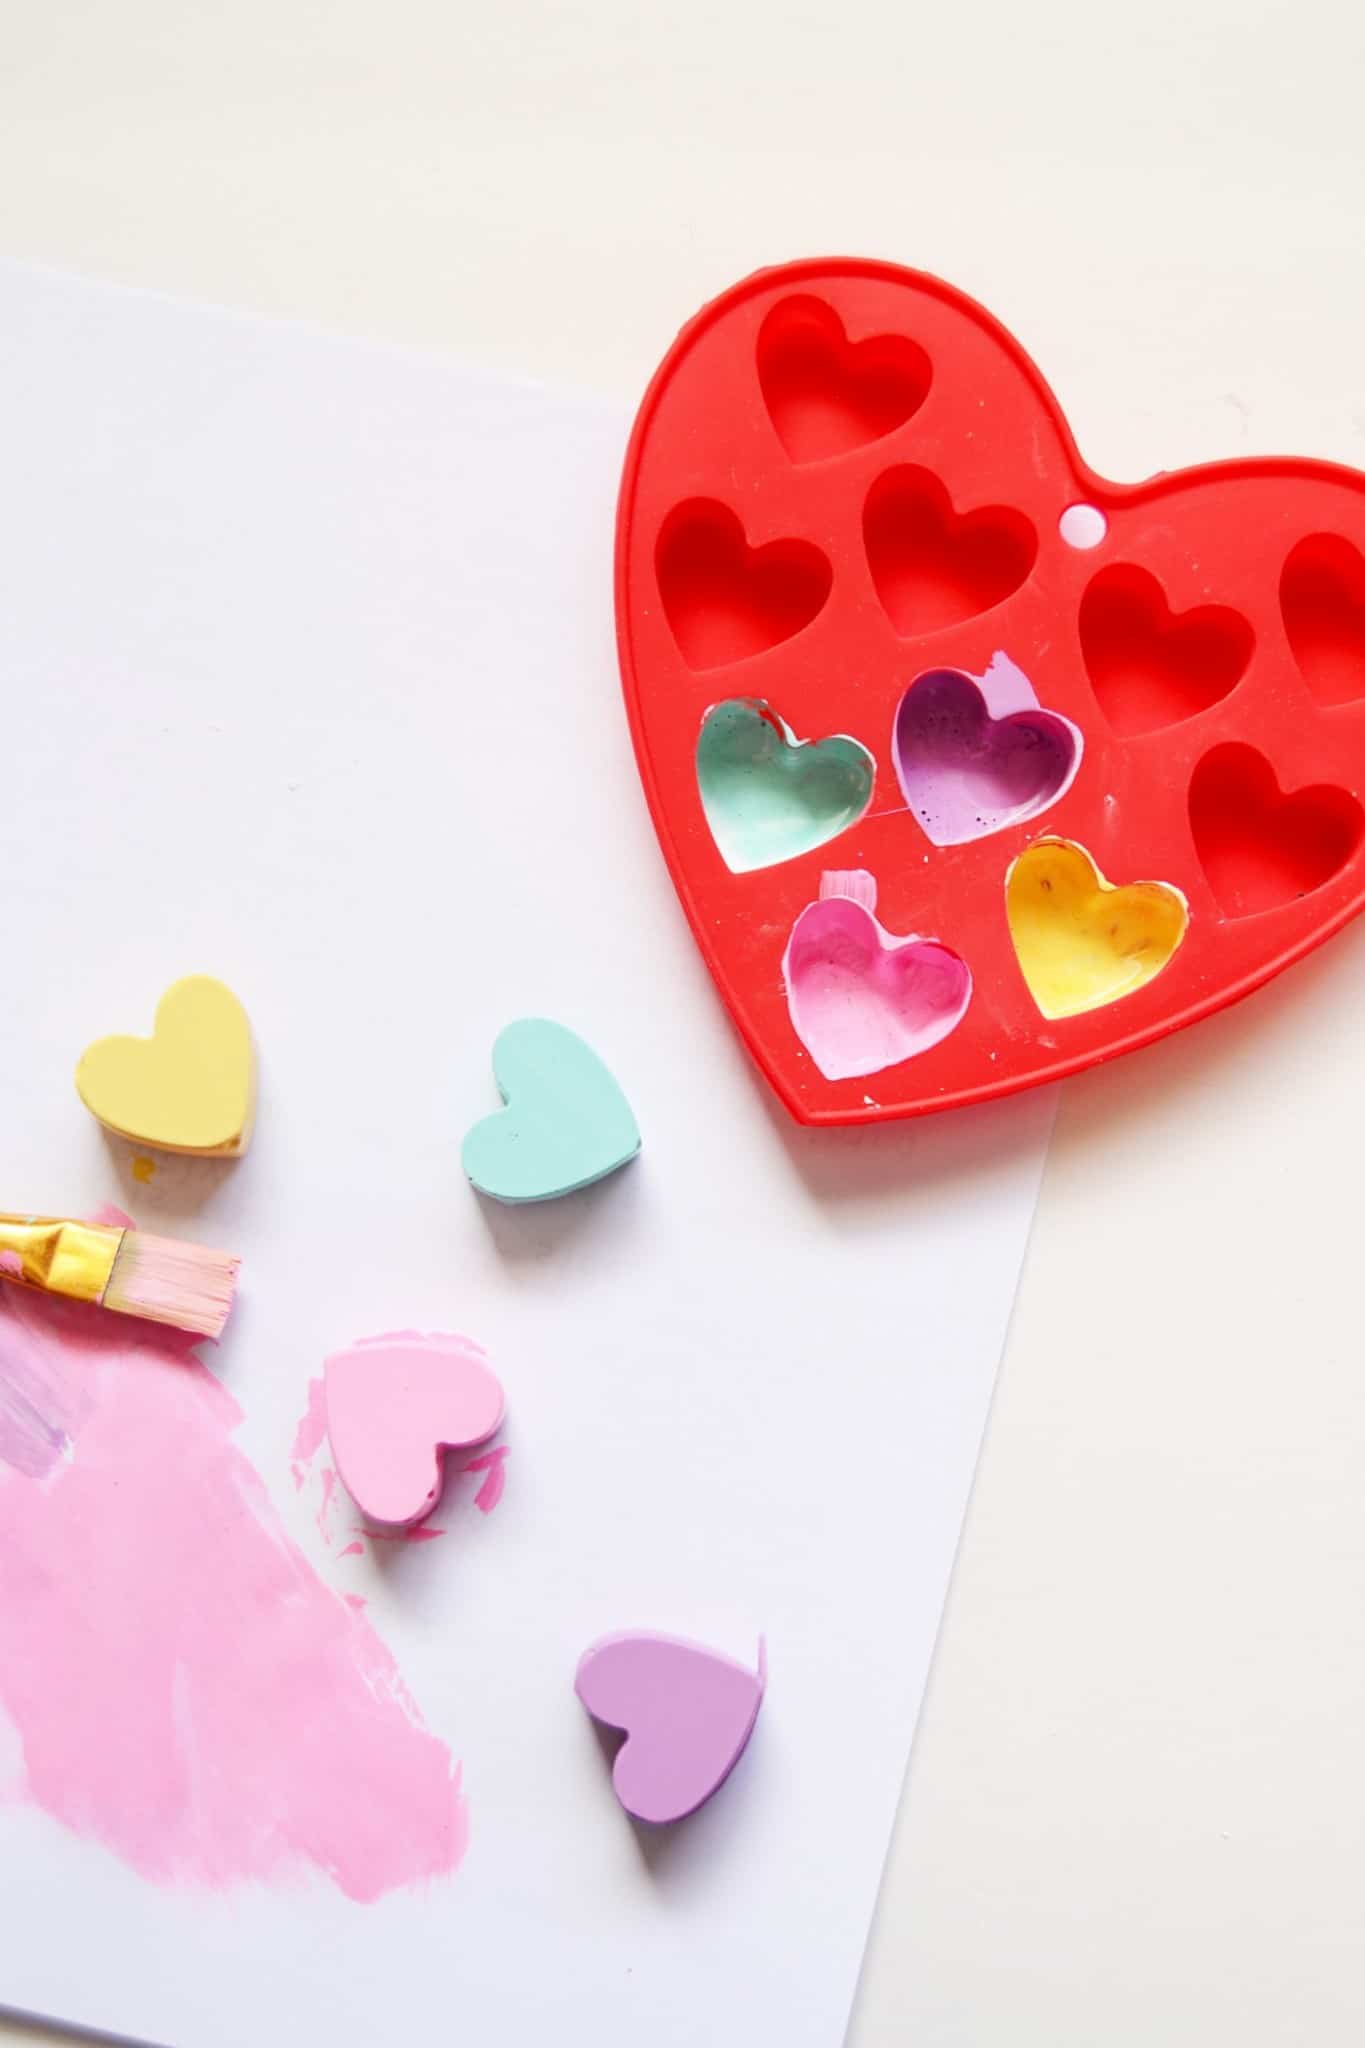 Painting the plaster hearts with pastel paint colors